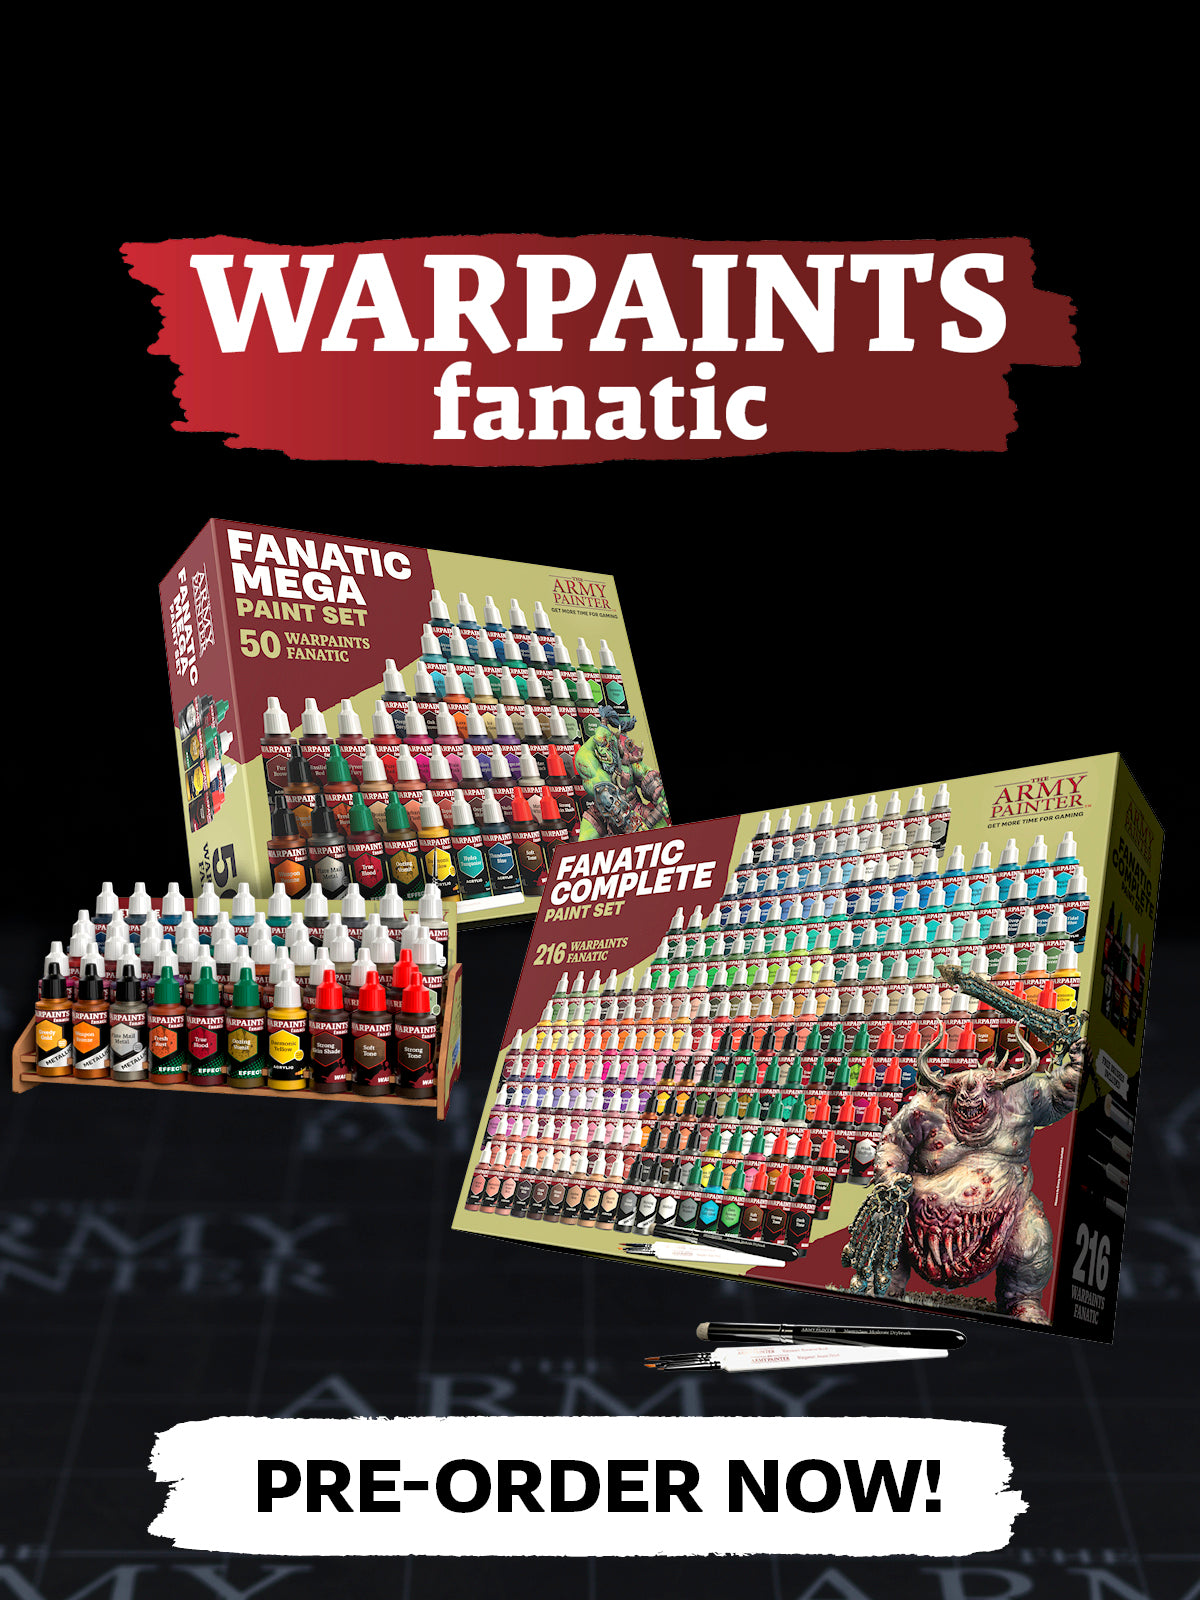 The Army Painter - Warpaints Air Upgrade from Mega to Complete Set –  Wargames Delivered